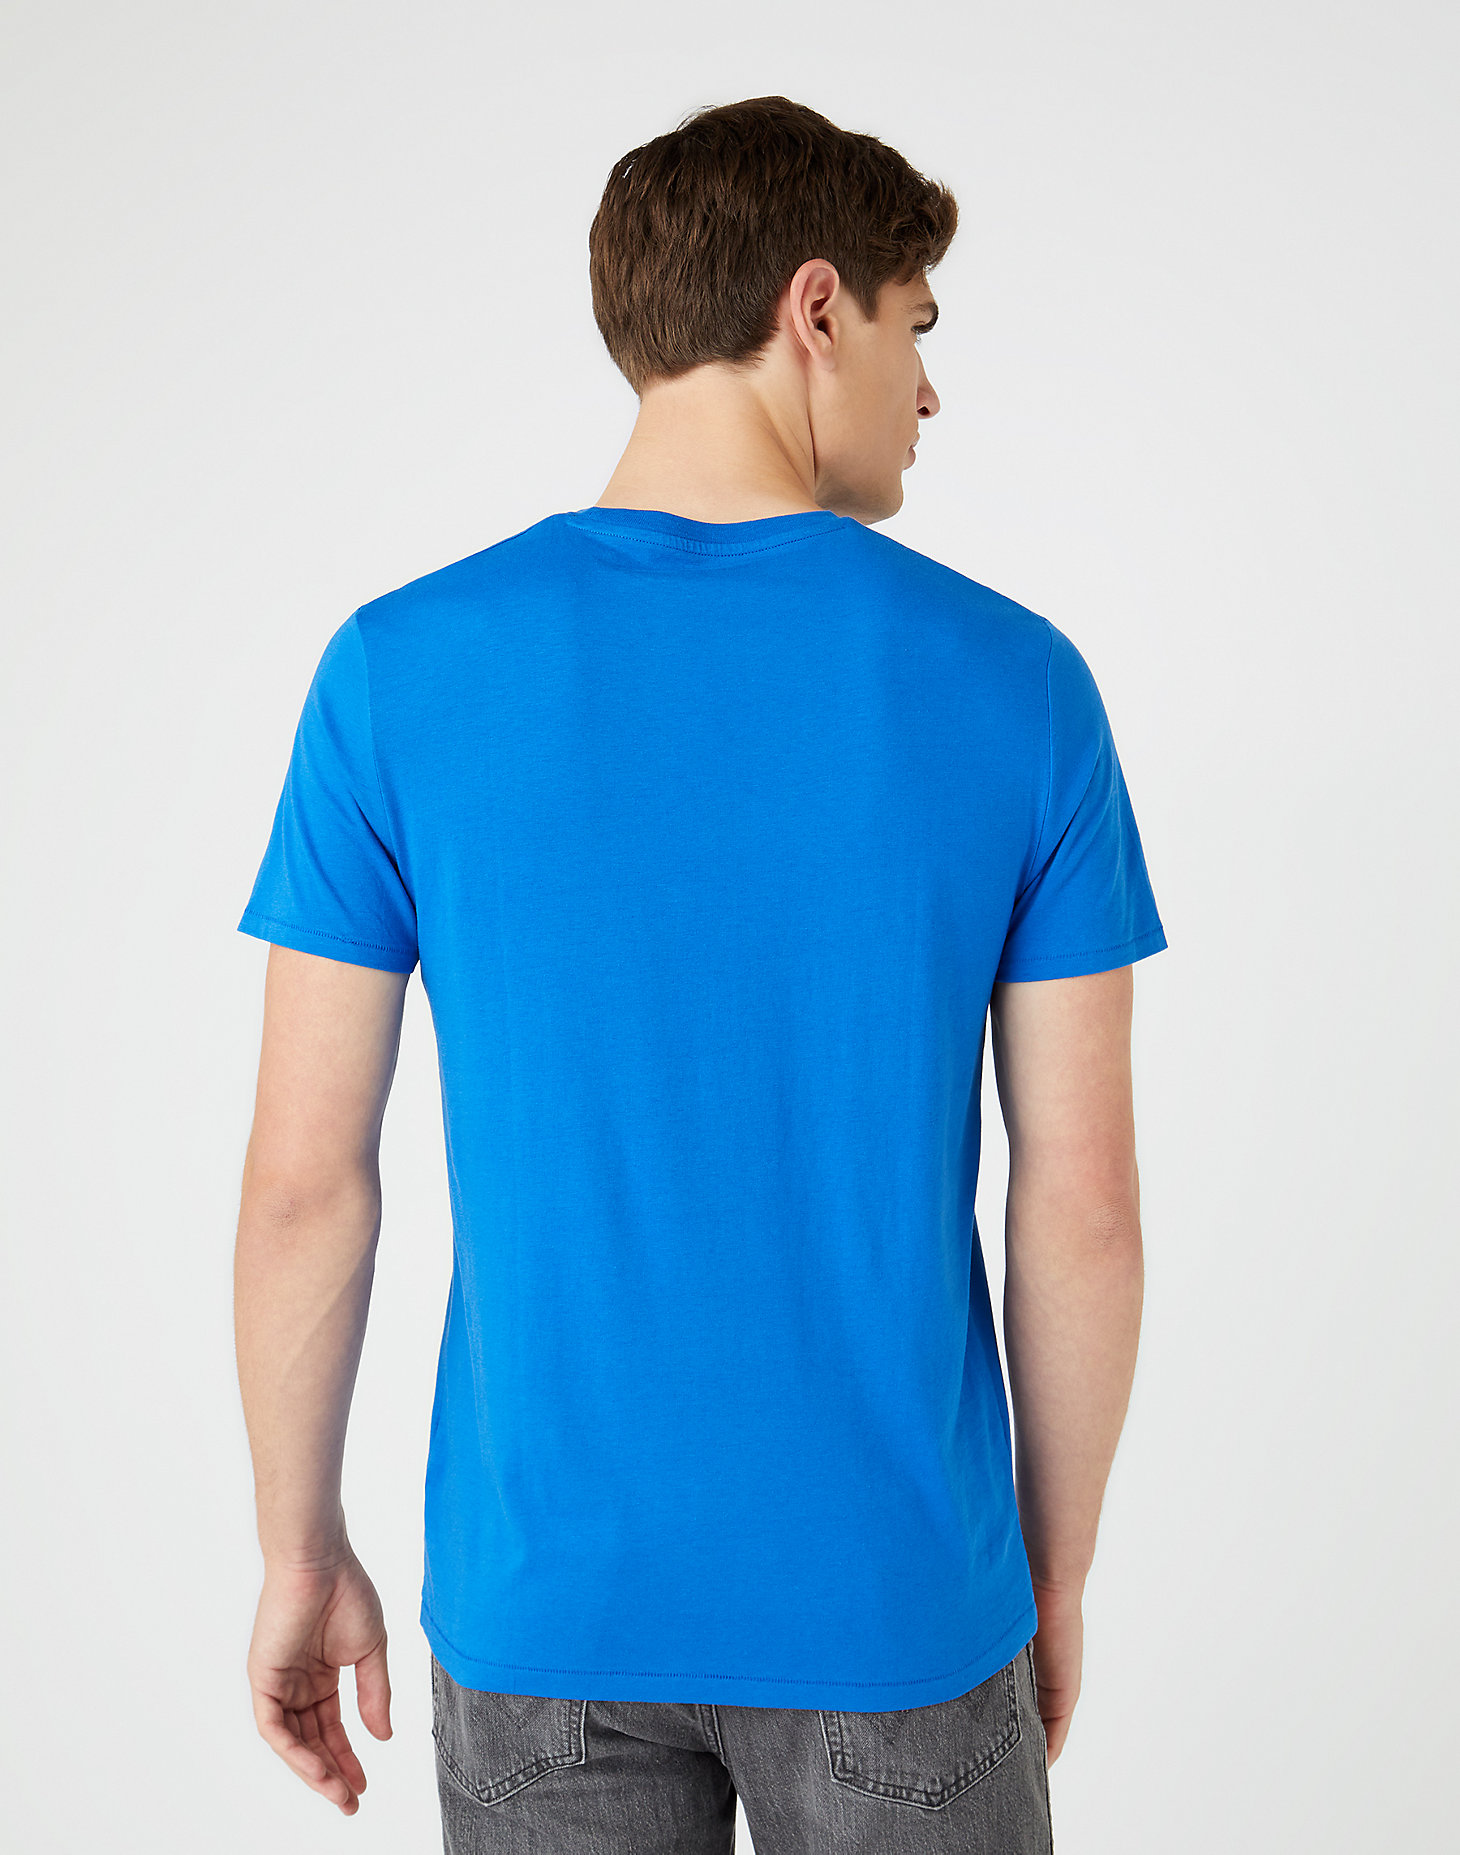 Sign Off Tee in Nautical Blue alternative view 2